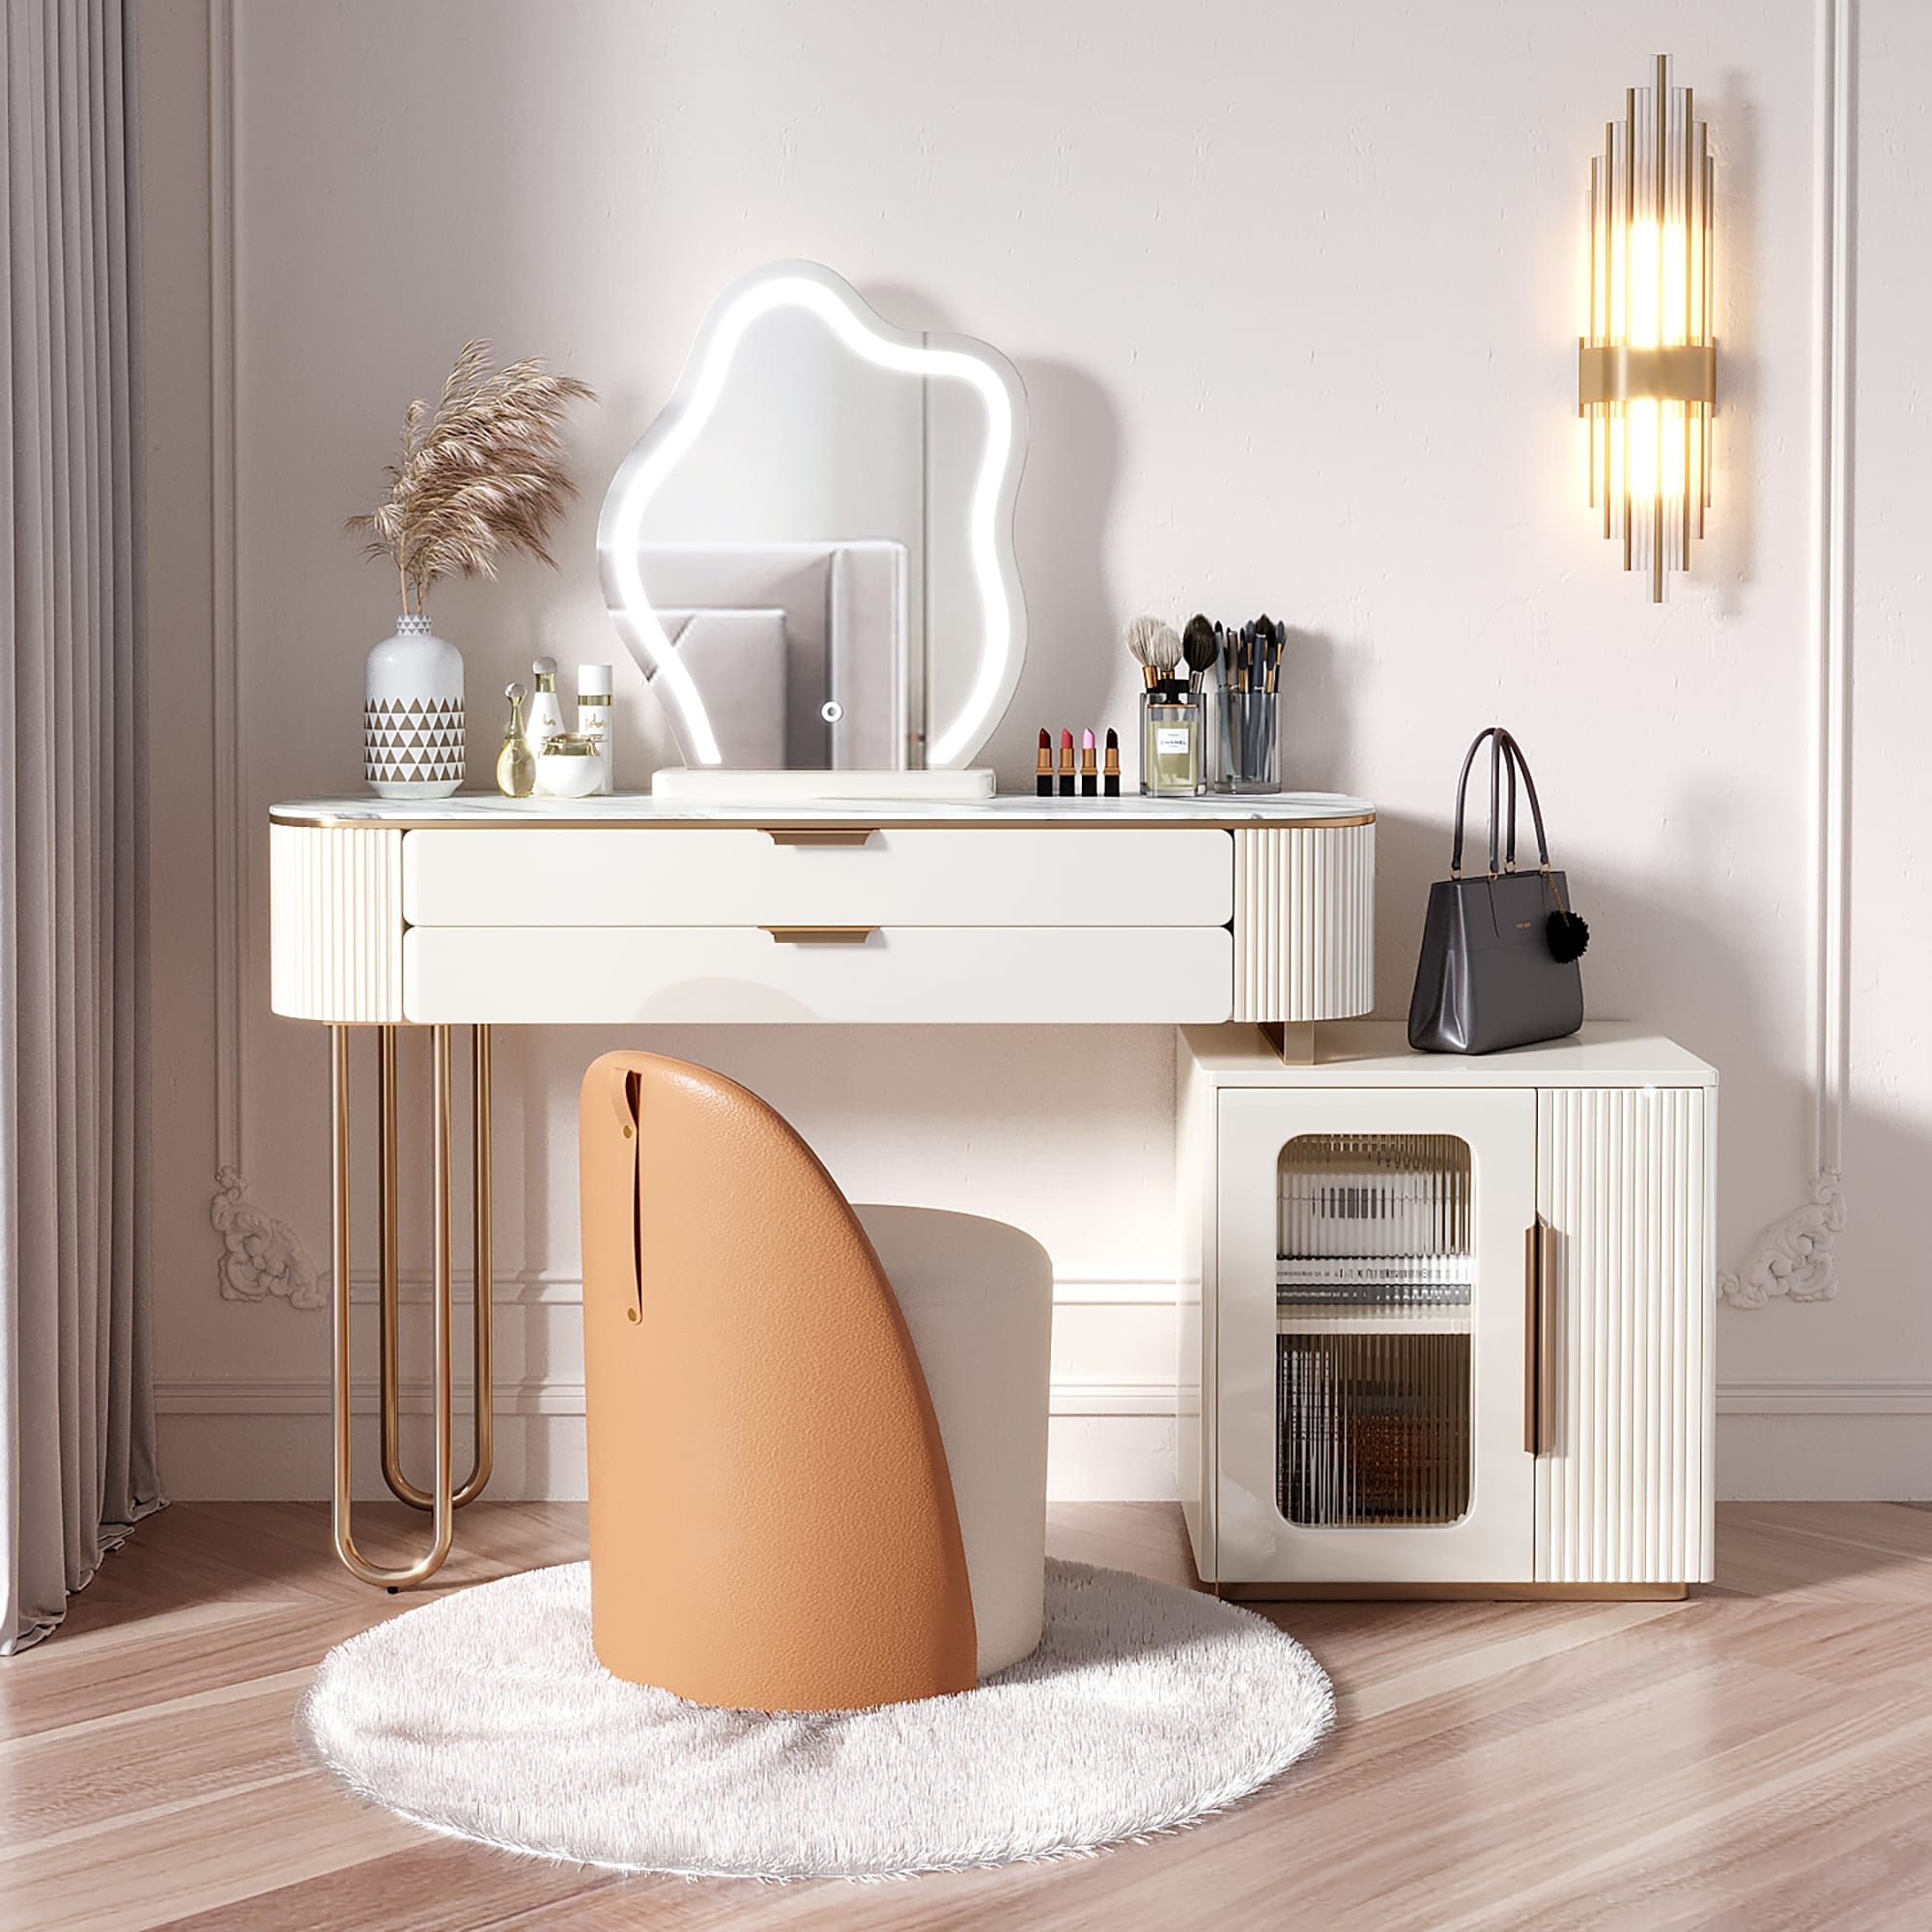 https://ak1.ostkcdn.com/images/products/is/images/direct/0b17b2081bd5a3026f2986c751311982aaff9eaf/JASIWAY-Modern-Makeup-Vanity-Dressing-Table-with-Drawers%2CWhite.jpg